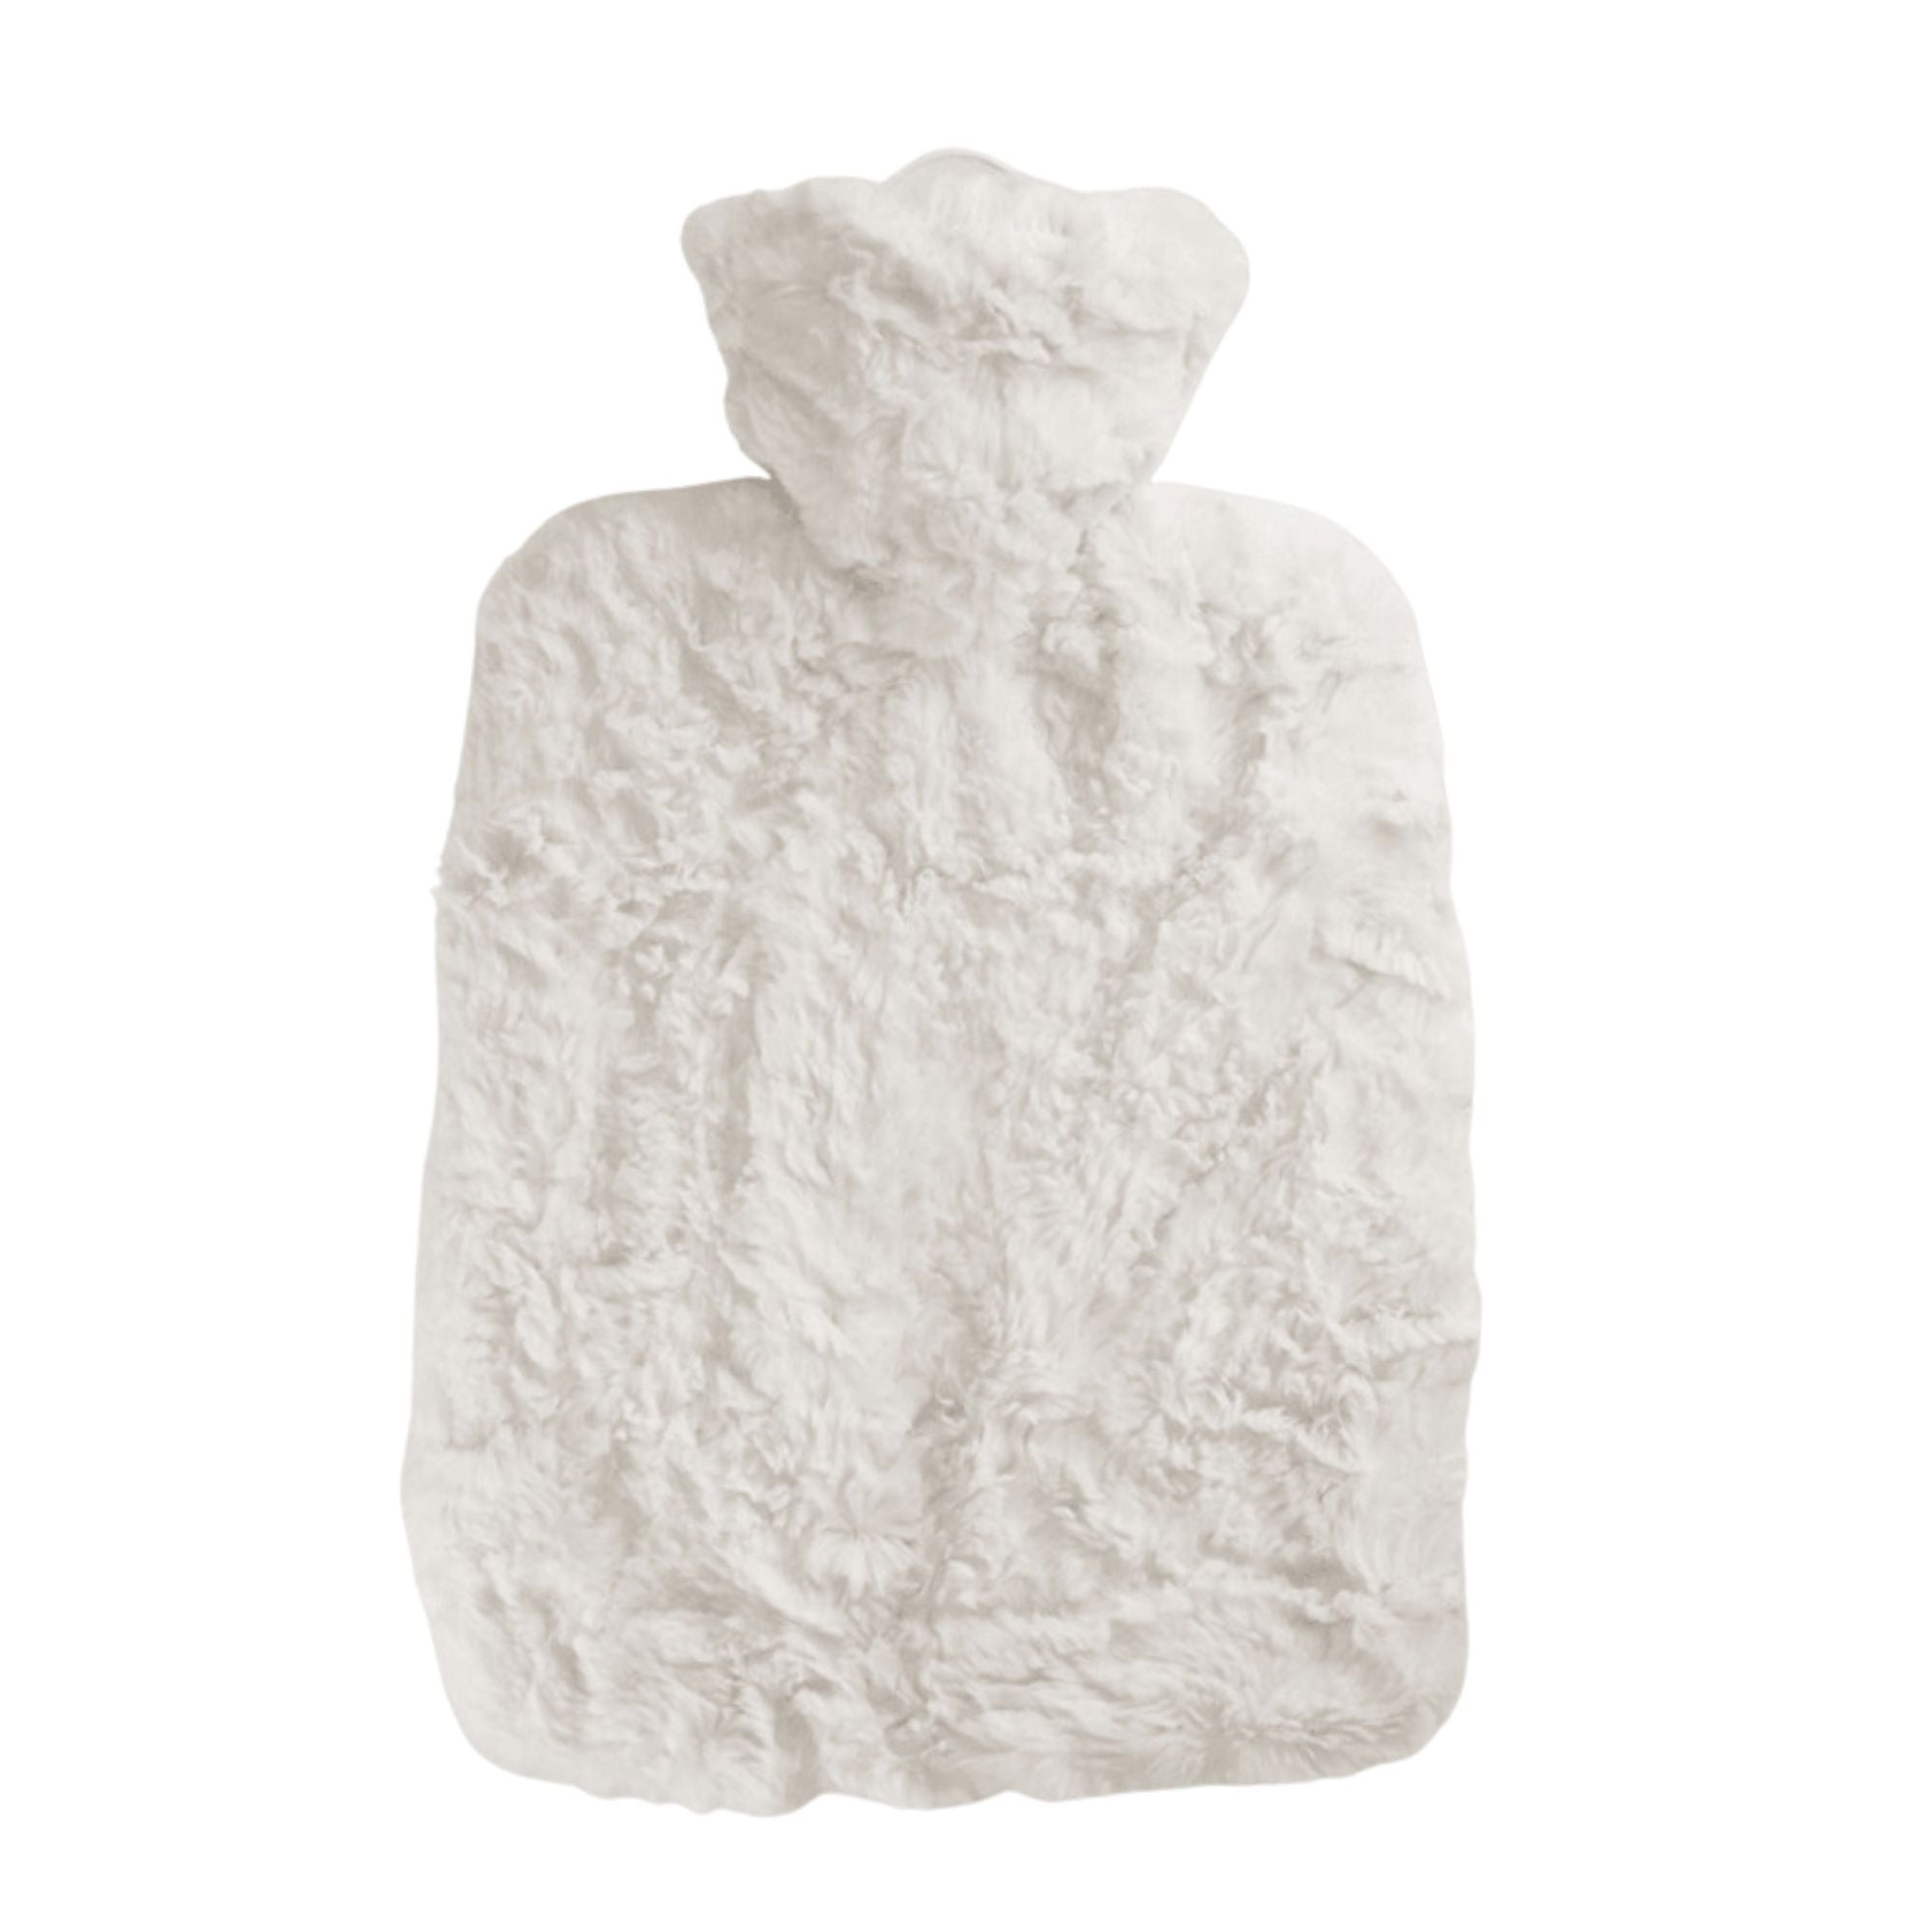 1.8 Litre Hot Water Bottle with White Luxury Faux Fur Cover (rubberless)